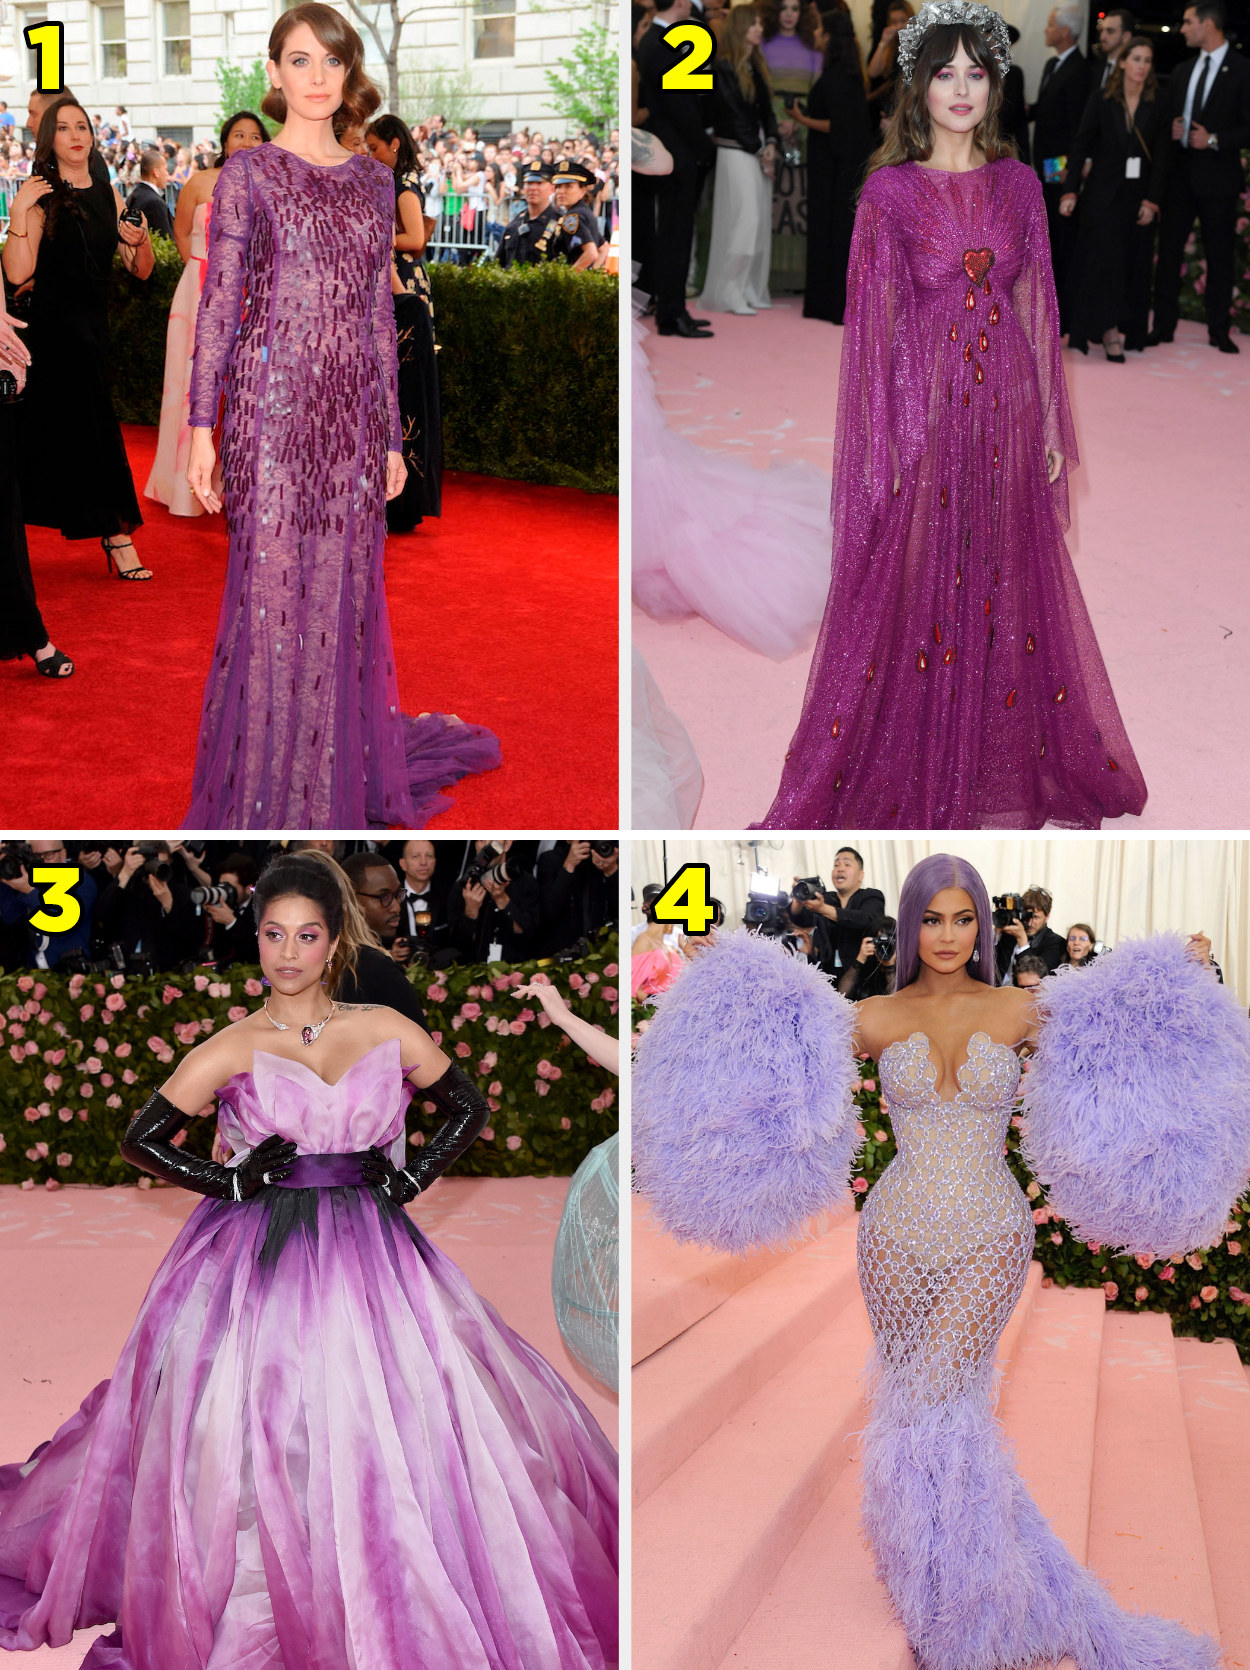 1. A longsleeved lace gown with sequins. 2. A longsleeved flowing gown with bell sleeves and a dropping heart applique. 3. A strapless gown that mimics flower petals. 4. A corsetted gown made of gems and feathers on the skirt and a feather boa.